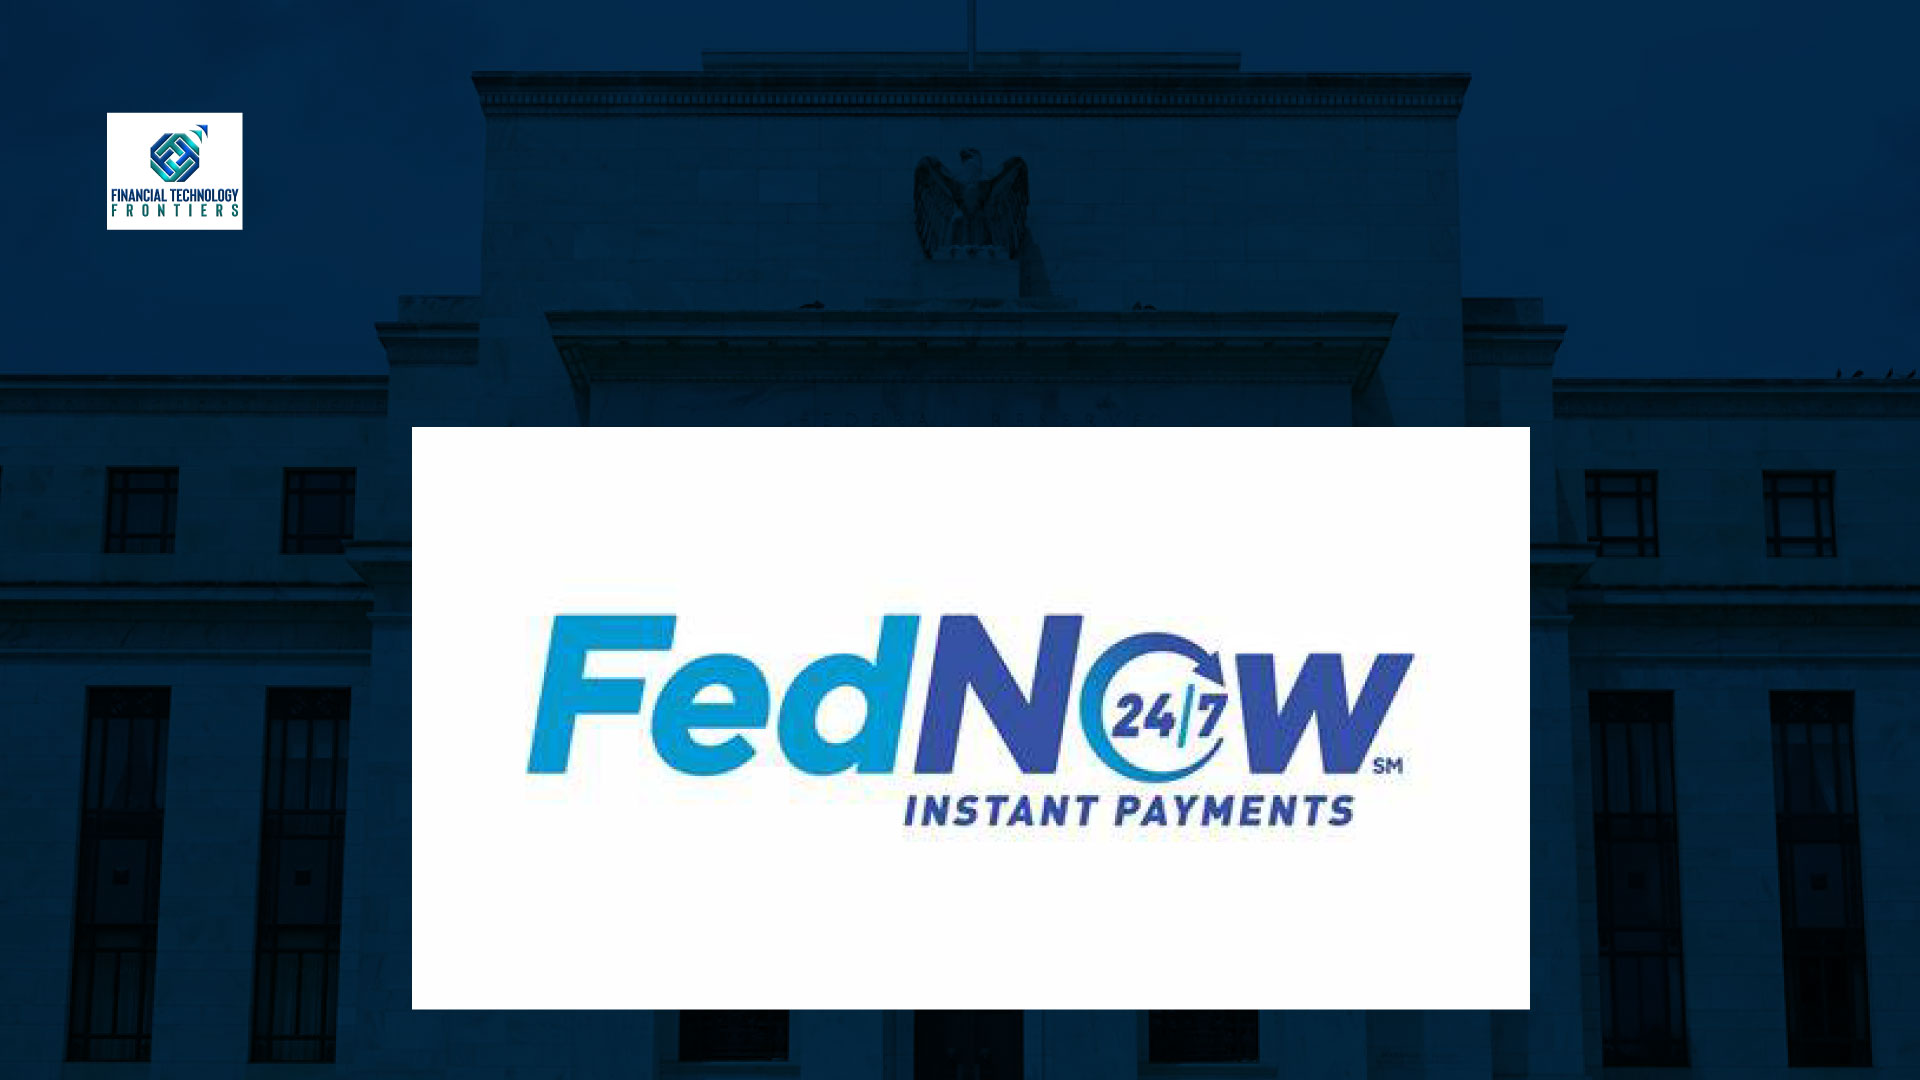 FedNow: Revolutionizing Real-Time Money Transfers for All Americans